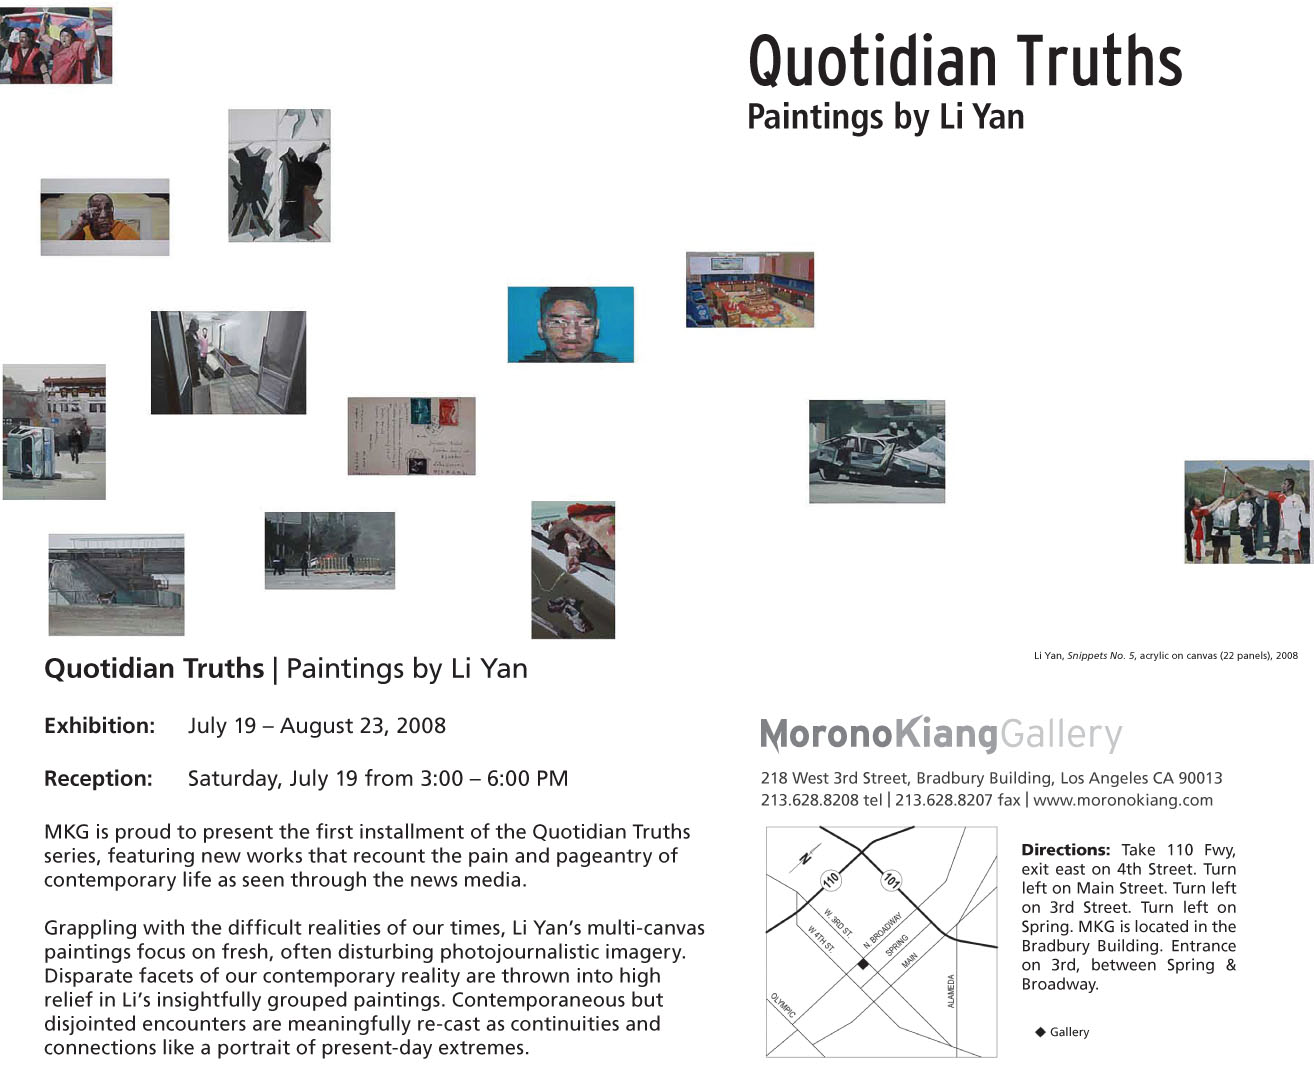 Quotadian Truths - Paintings by Li Yan